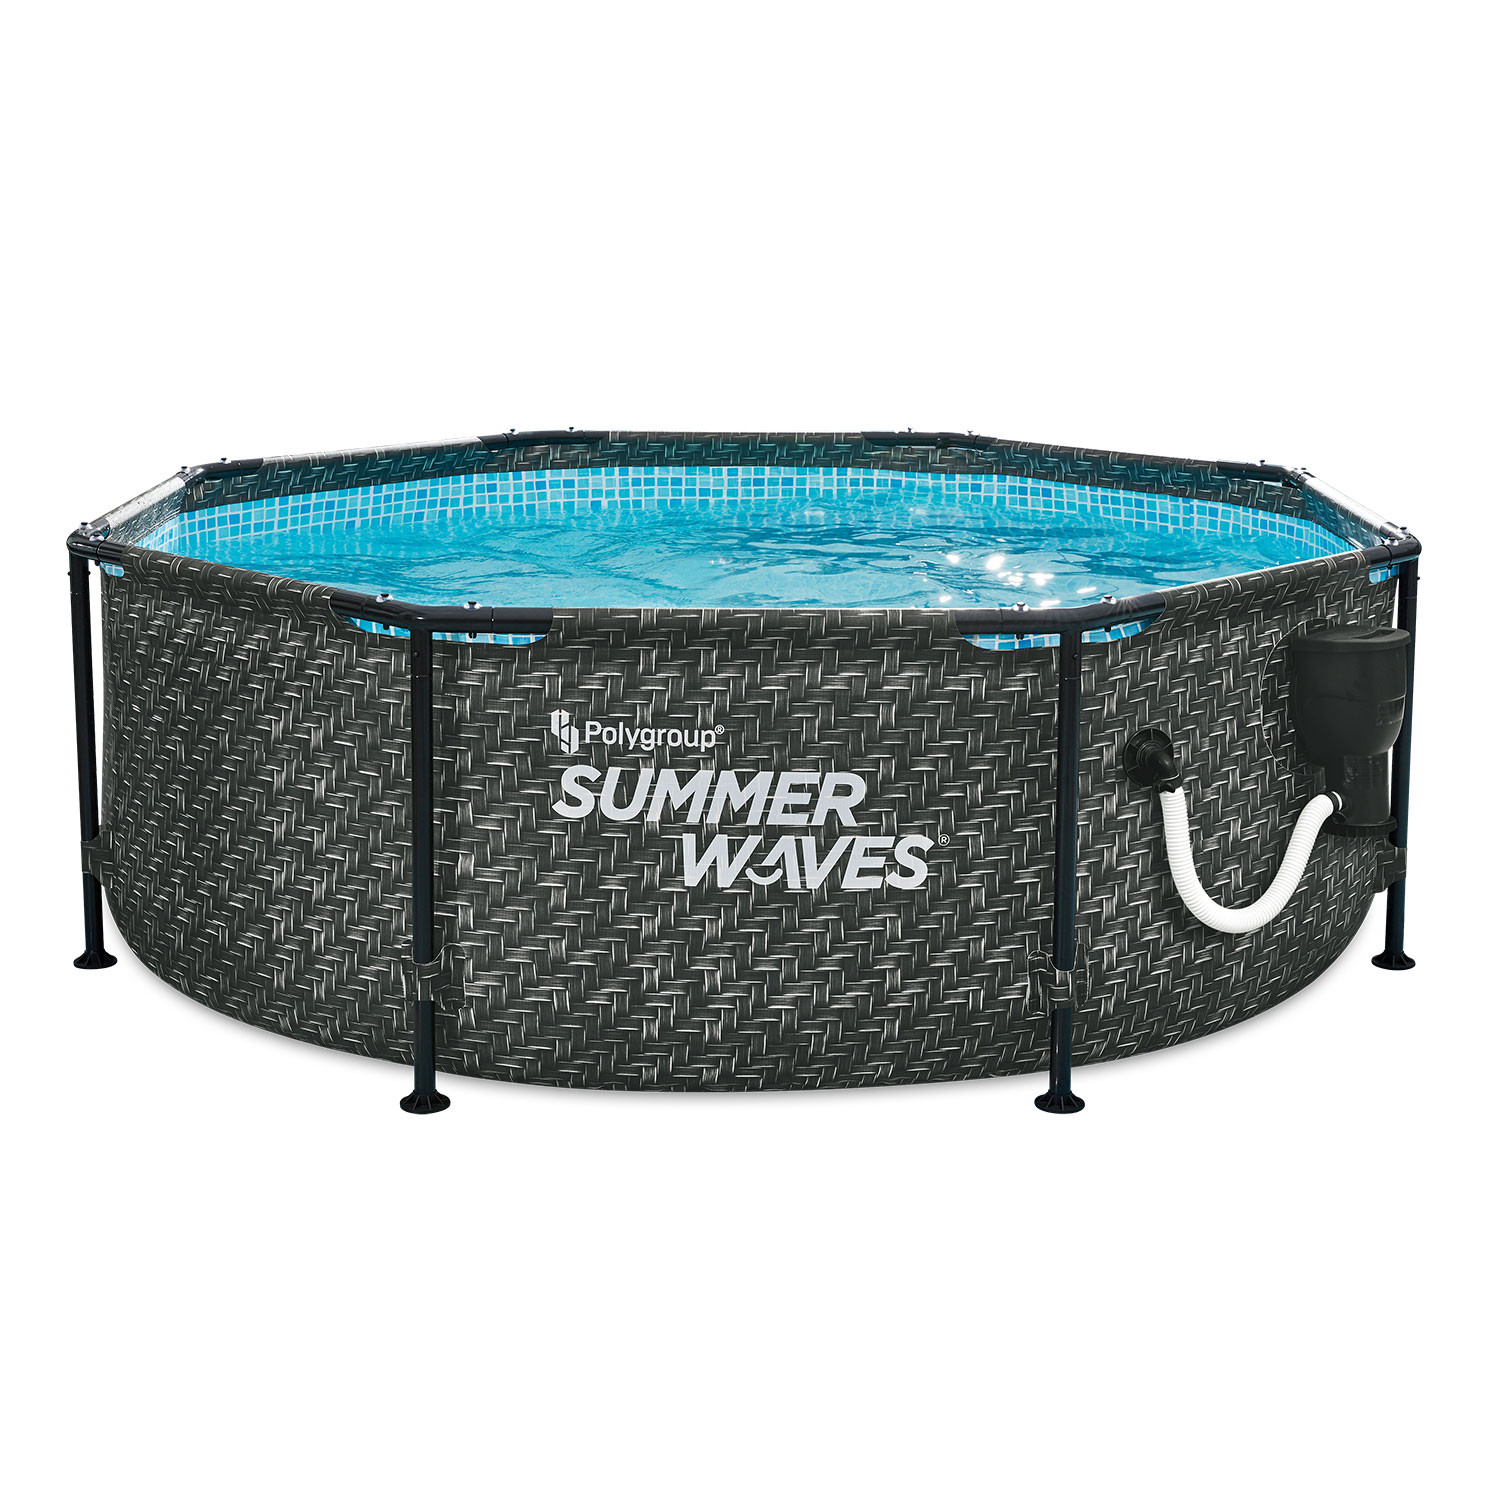 Summer Waves Above Ground Pool
 Summer Waves Active 8ft x 30in Ground Frame Swimming